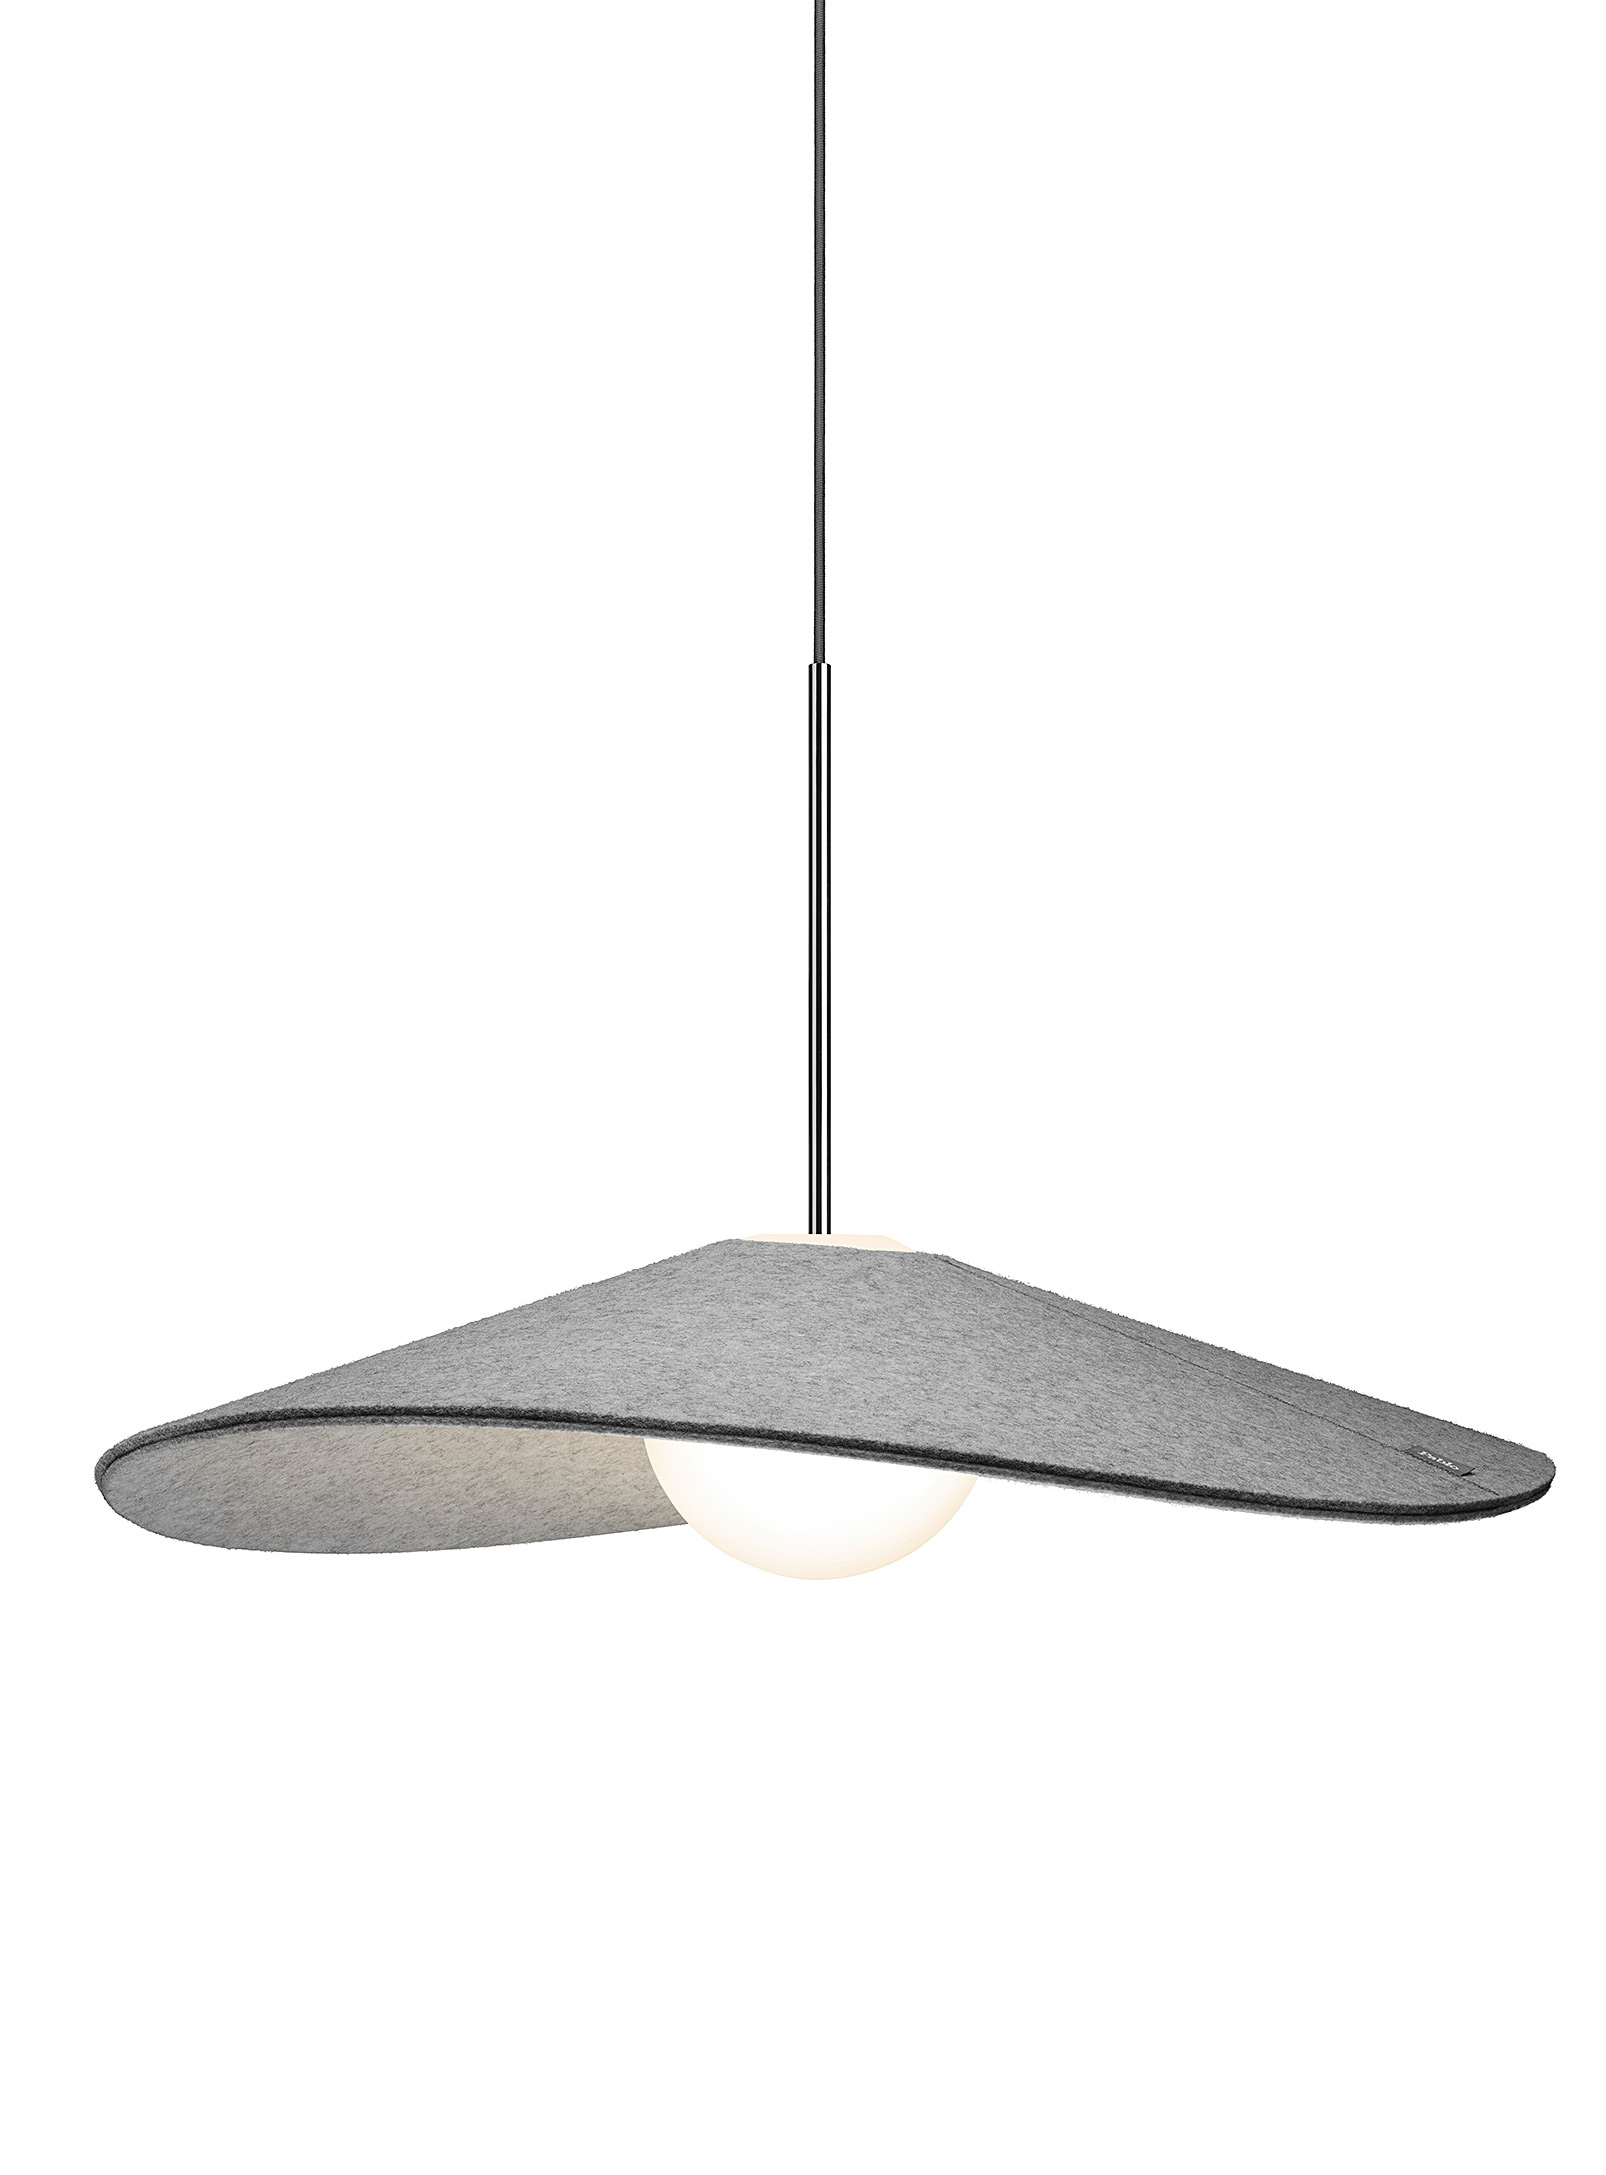 Pablo Designs Bola Felt Pendant See Available Sizes In Light Grey